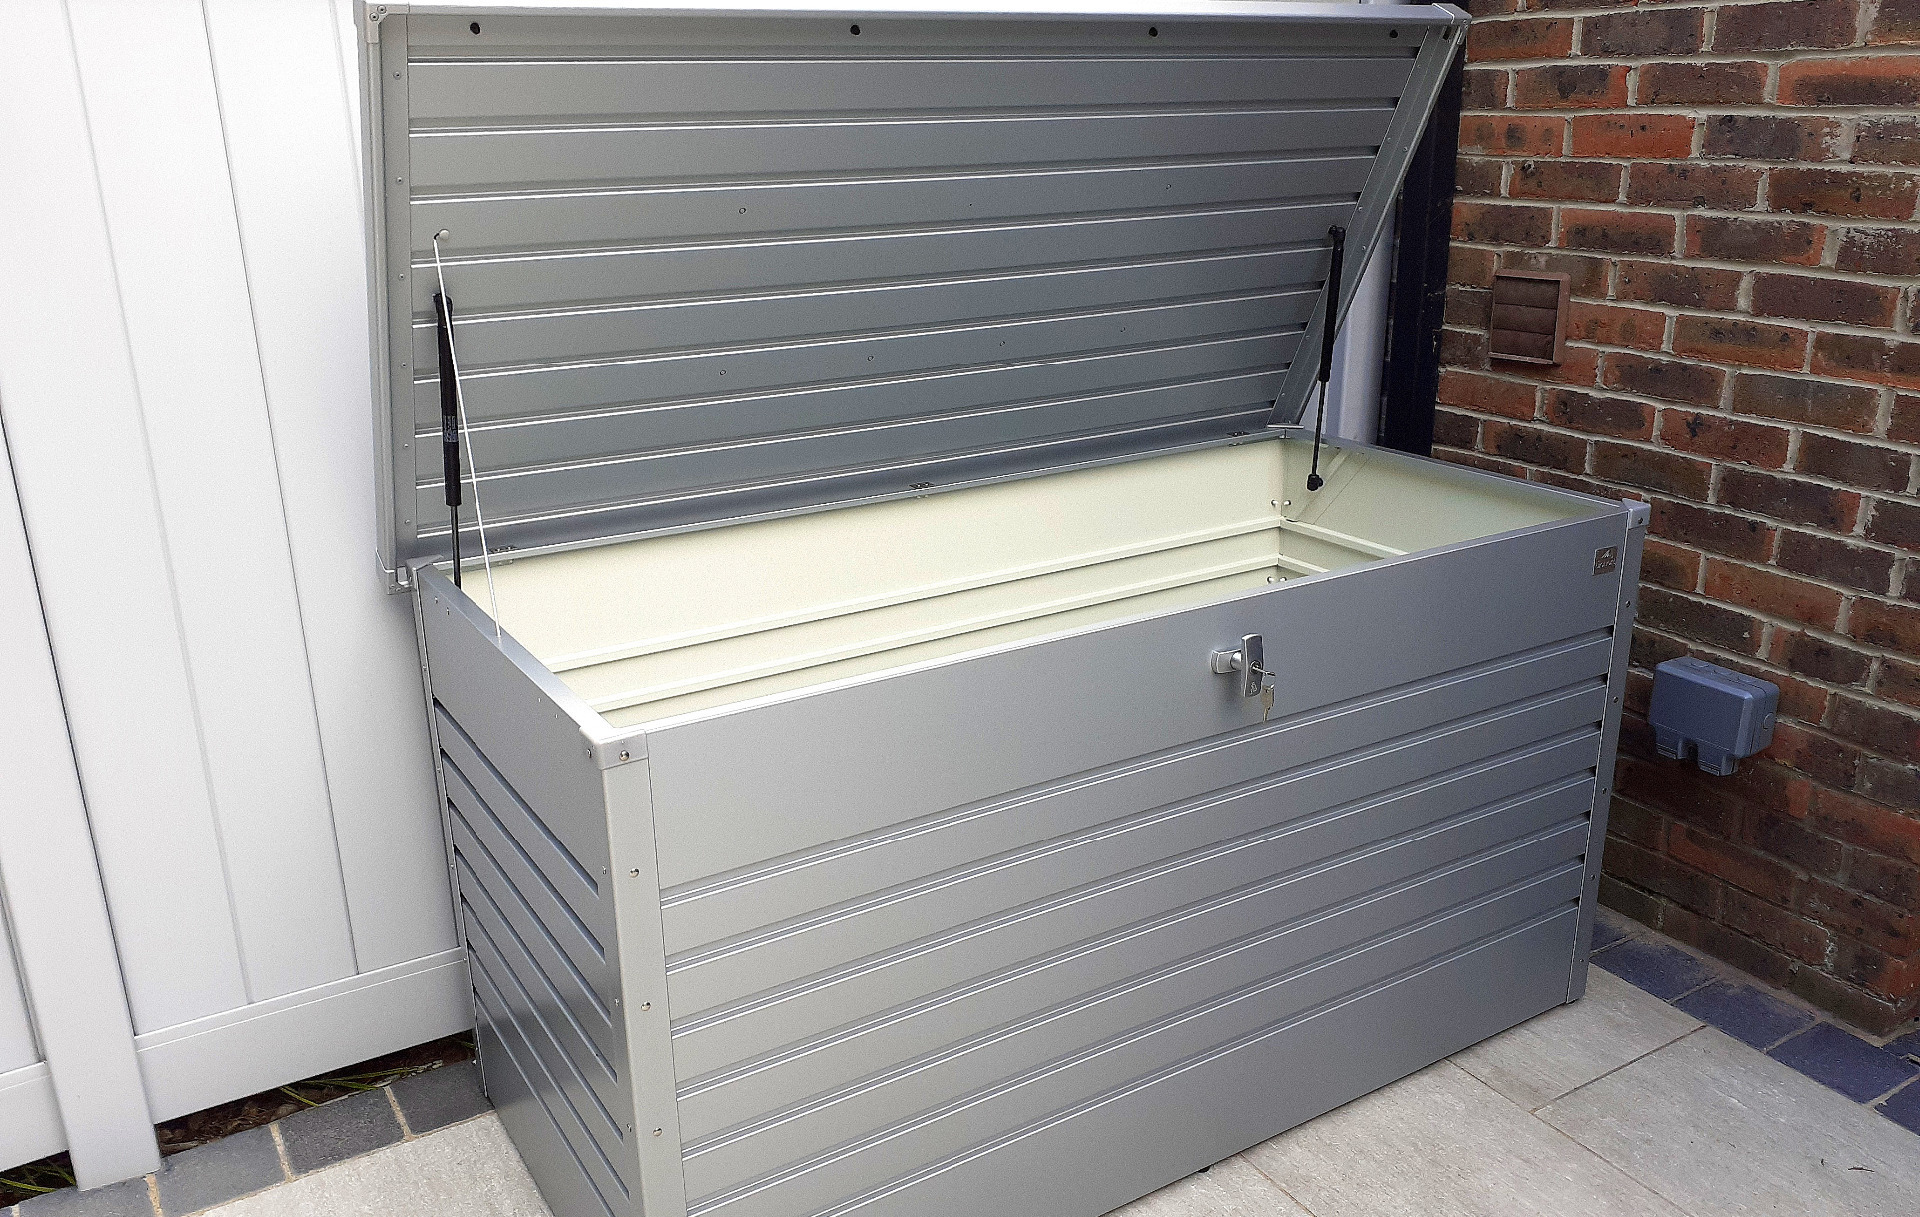 The superb quality and style of the Biohort LeisureTime Box 160 in metallic silver  | supplied + installed in Terenure by Owen Chubb Landscapers. Tel 087-2306 128.